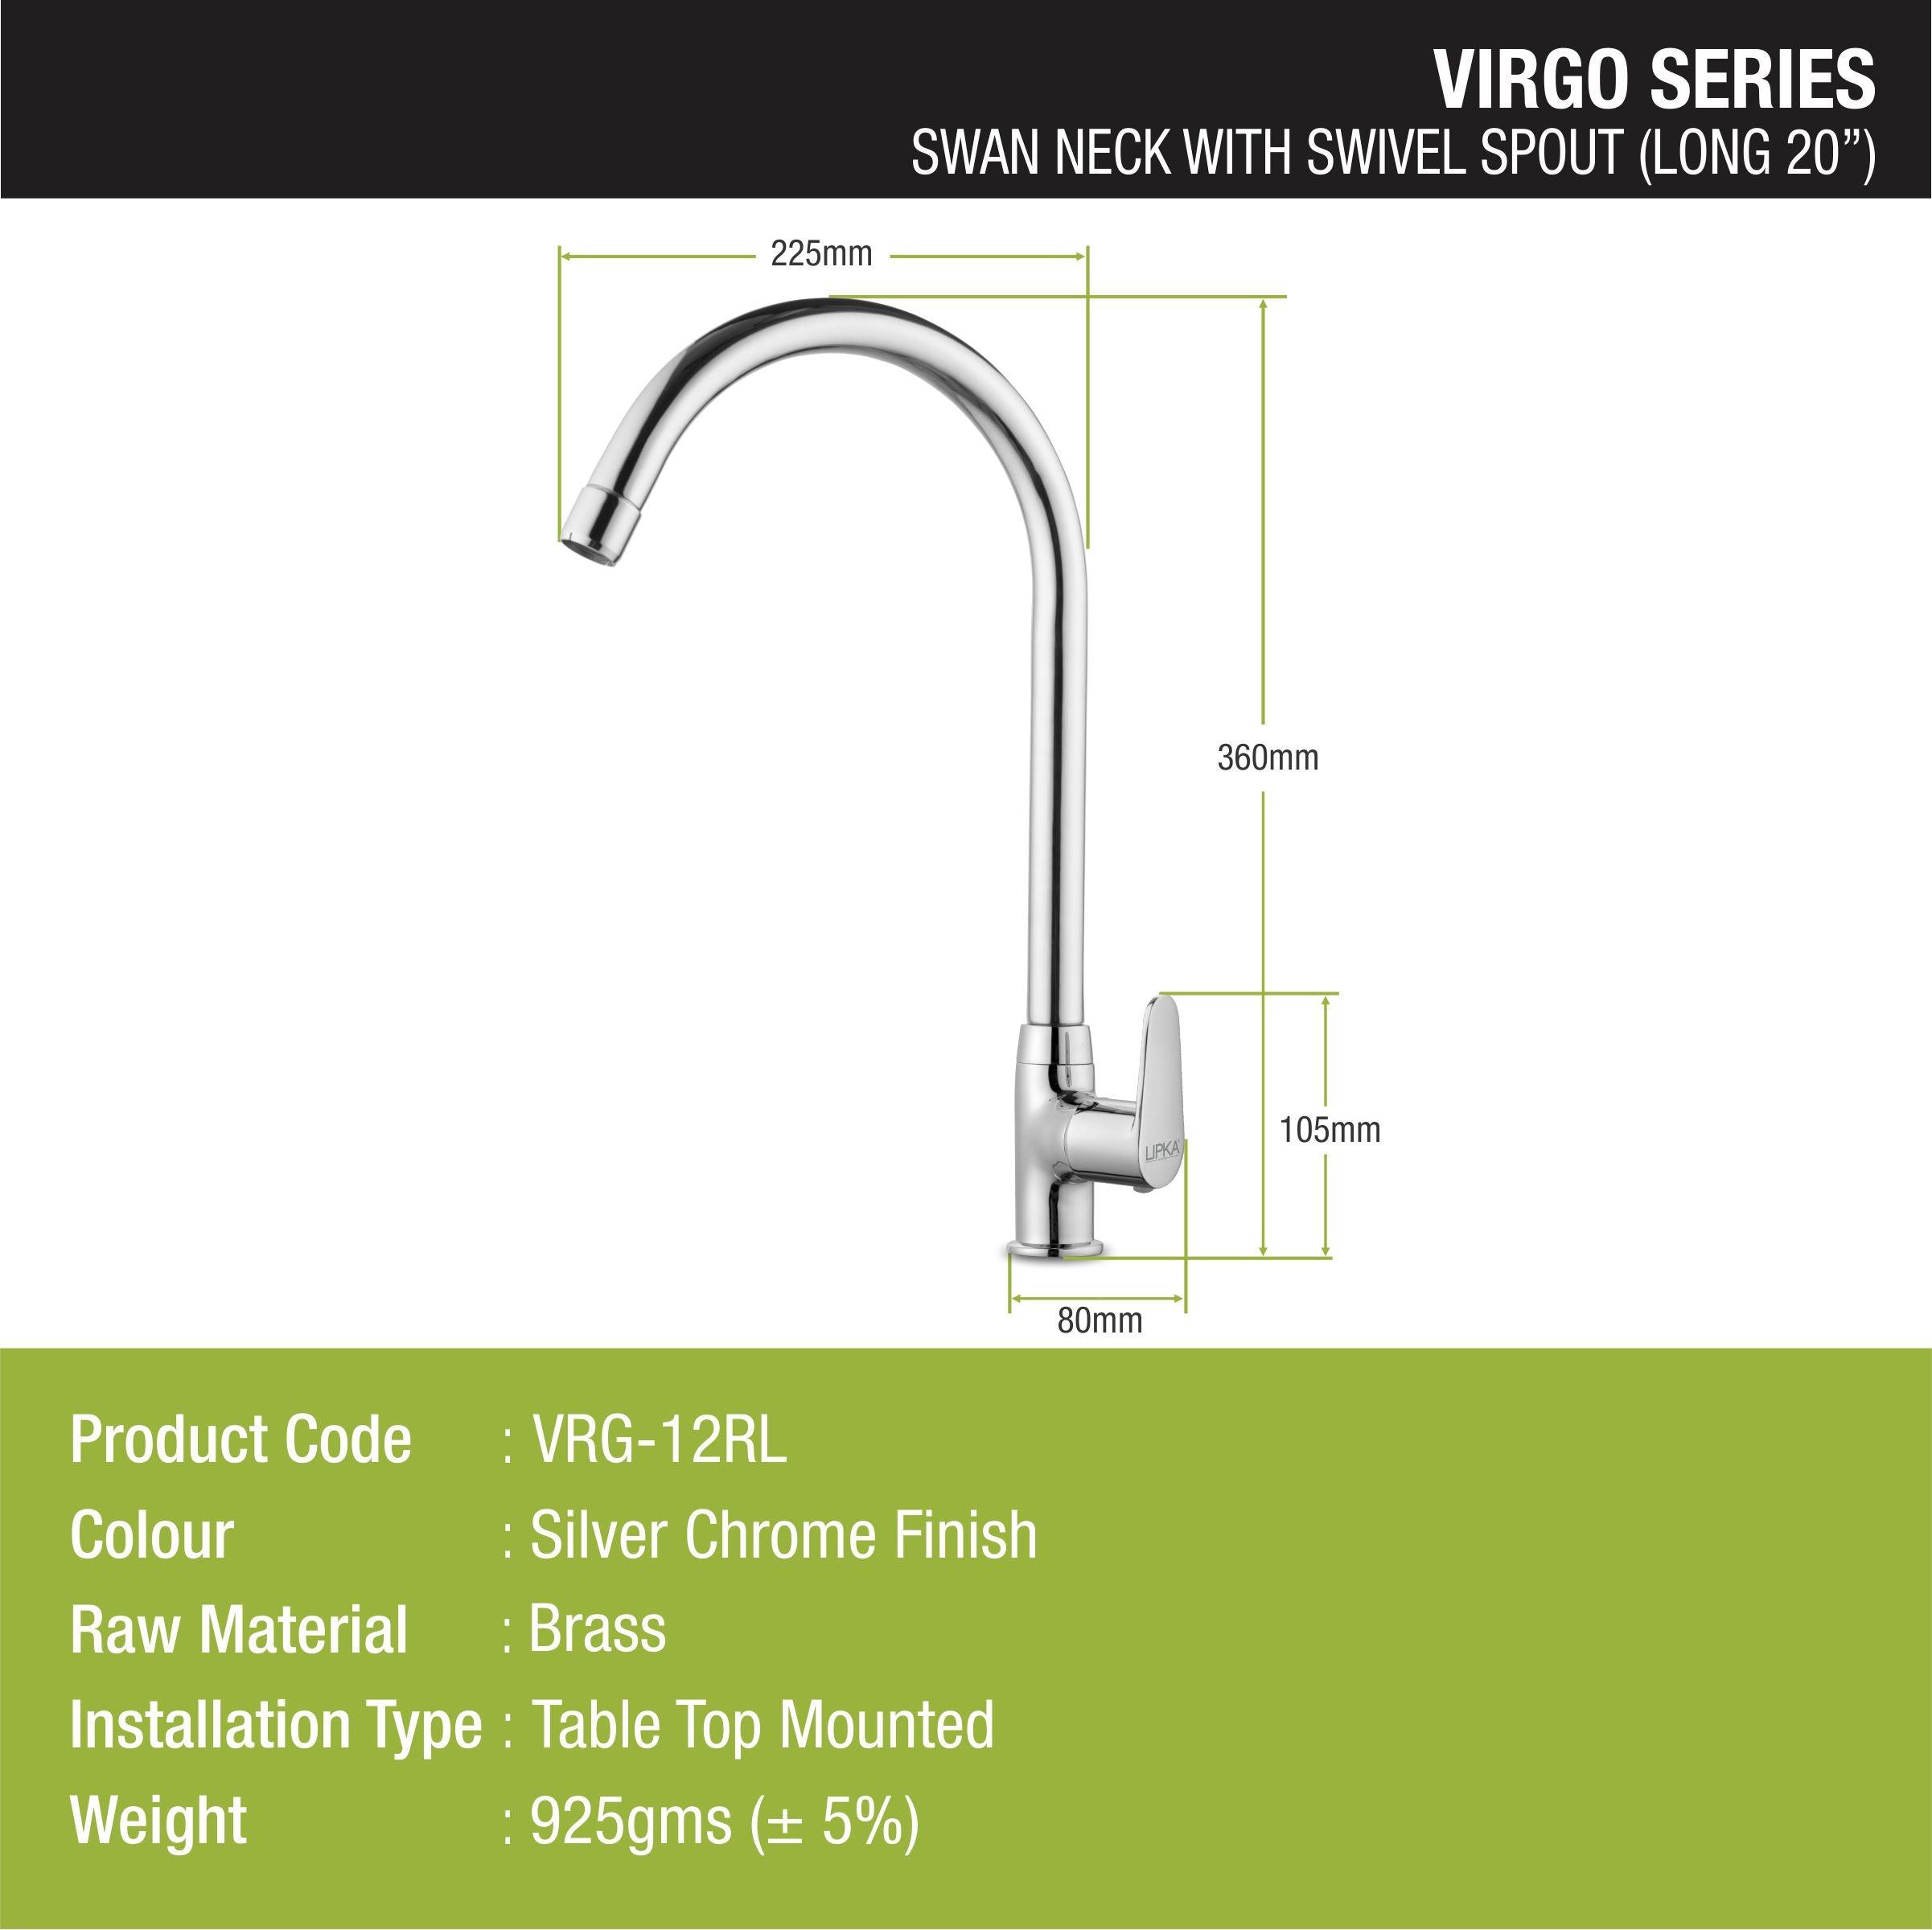 Virgo Swan Neck with Large (20 Inches) Round Swivel Spout Faucet sizes and dimensions 